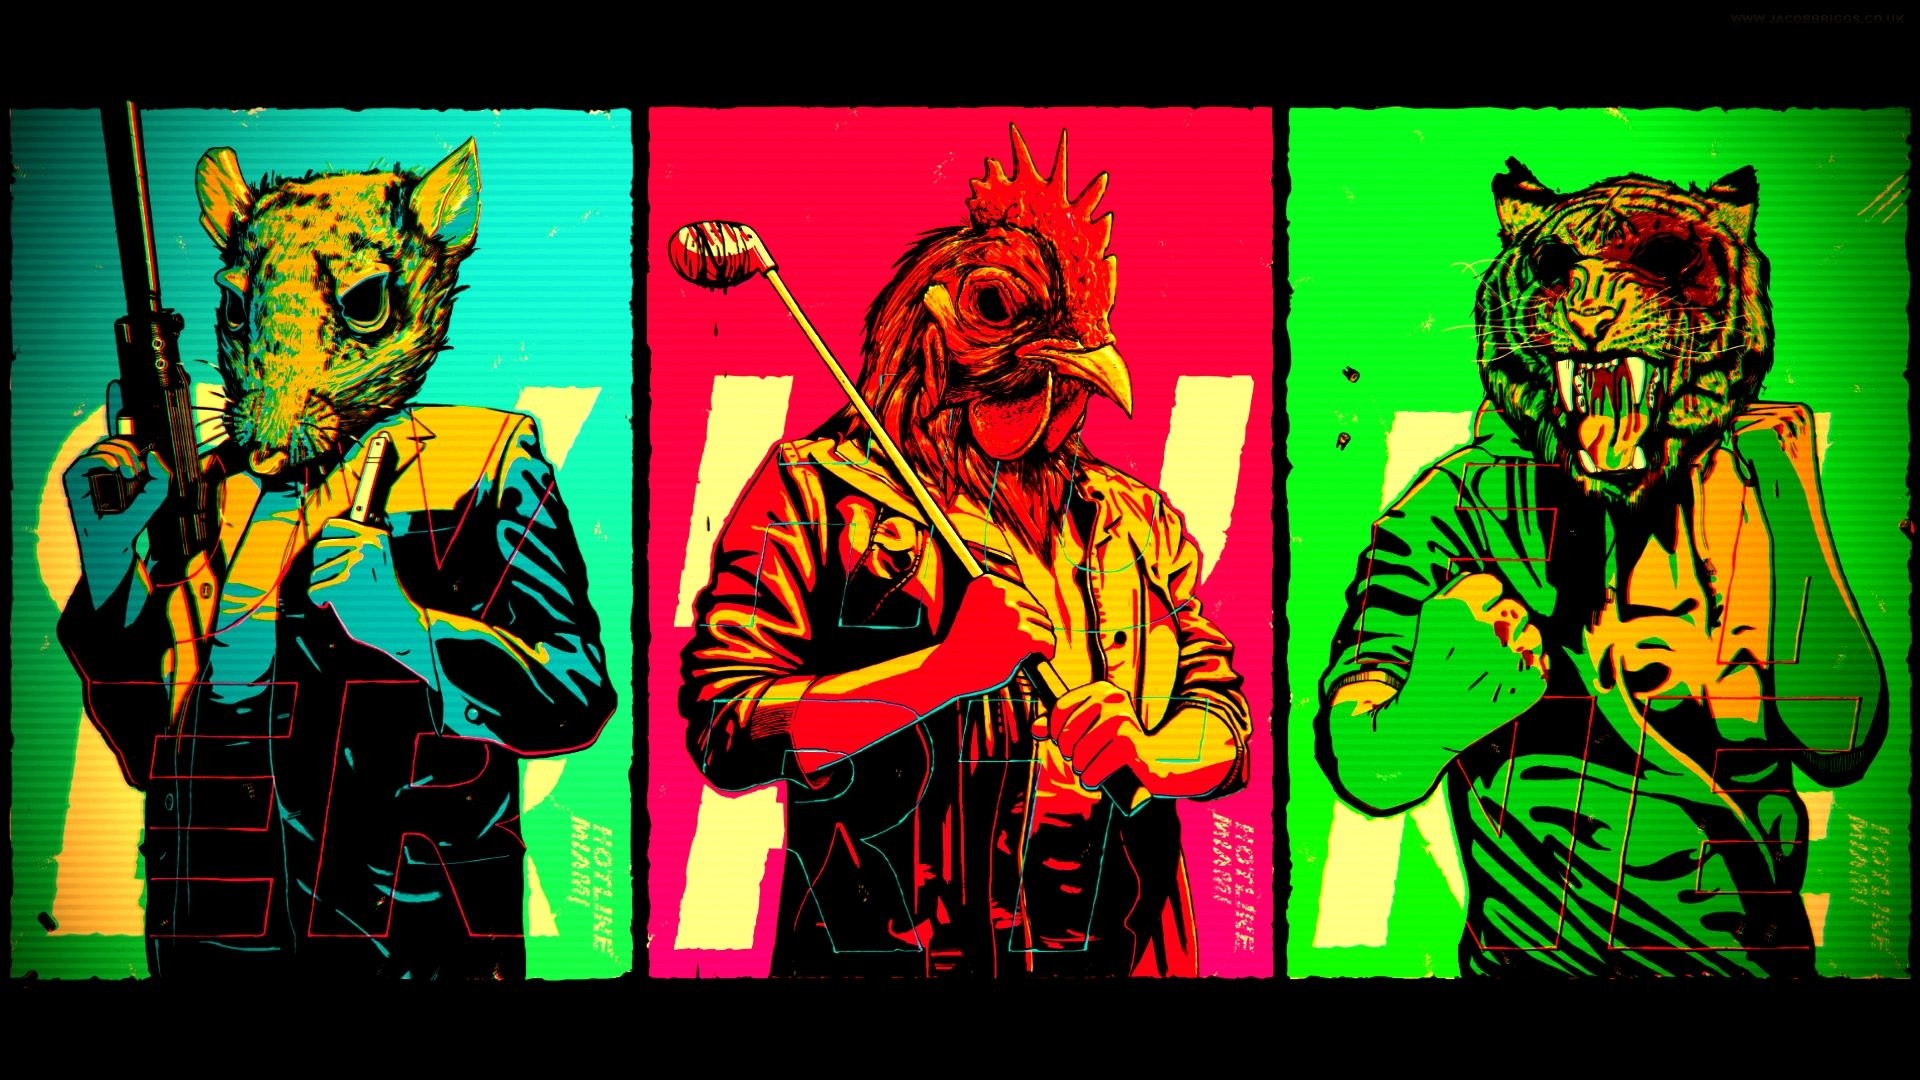 1920x1080 -MIAMI action shooter fighting hotline miami payday poster wallpaper .